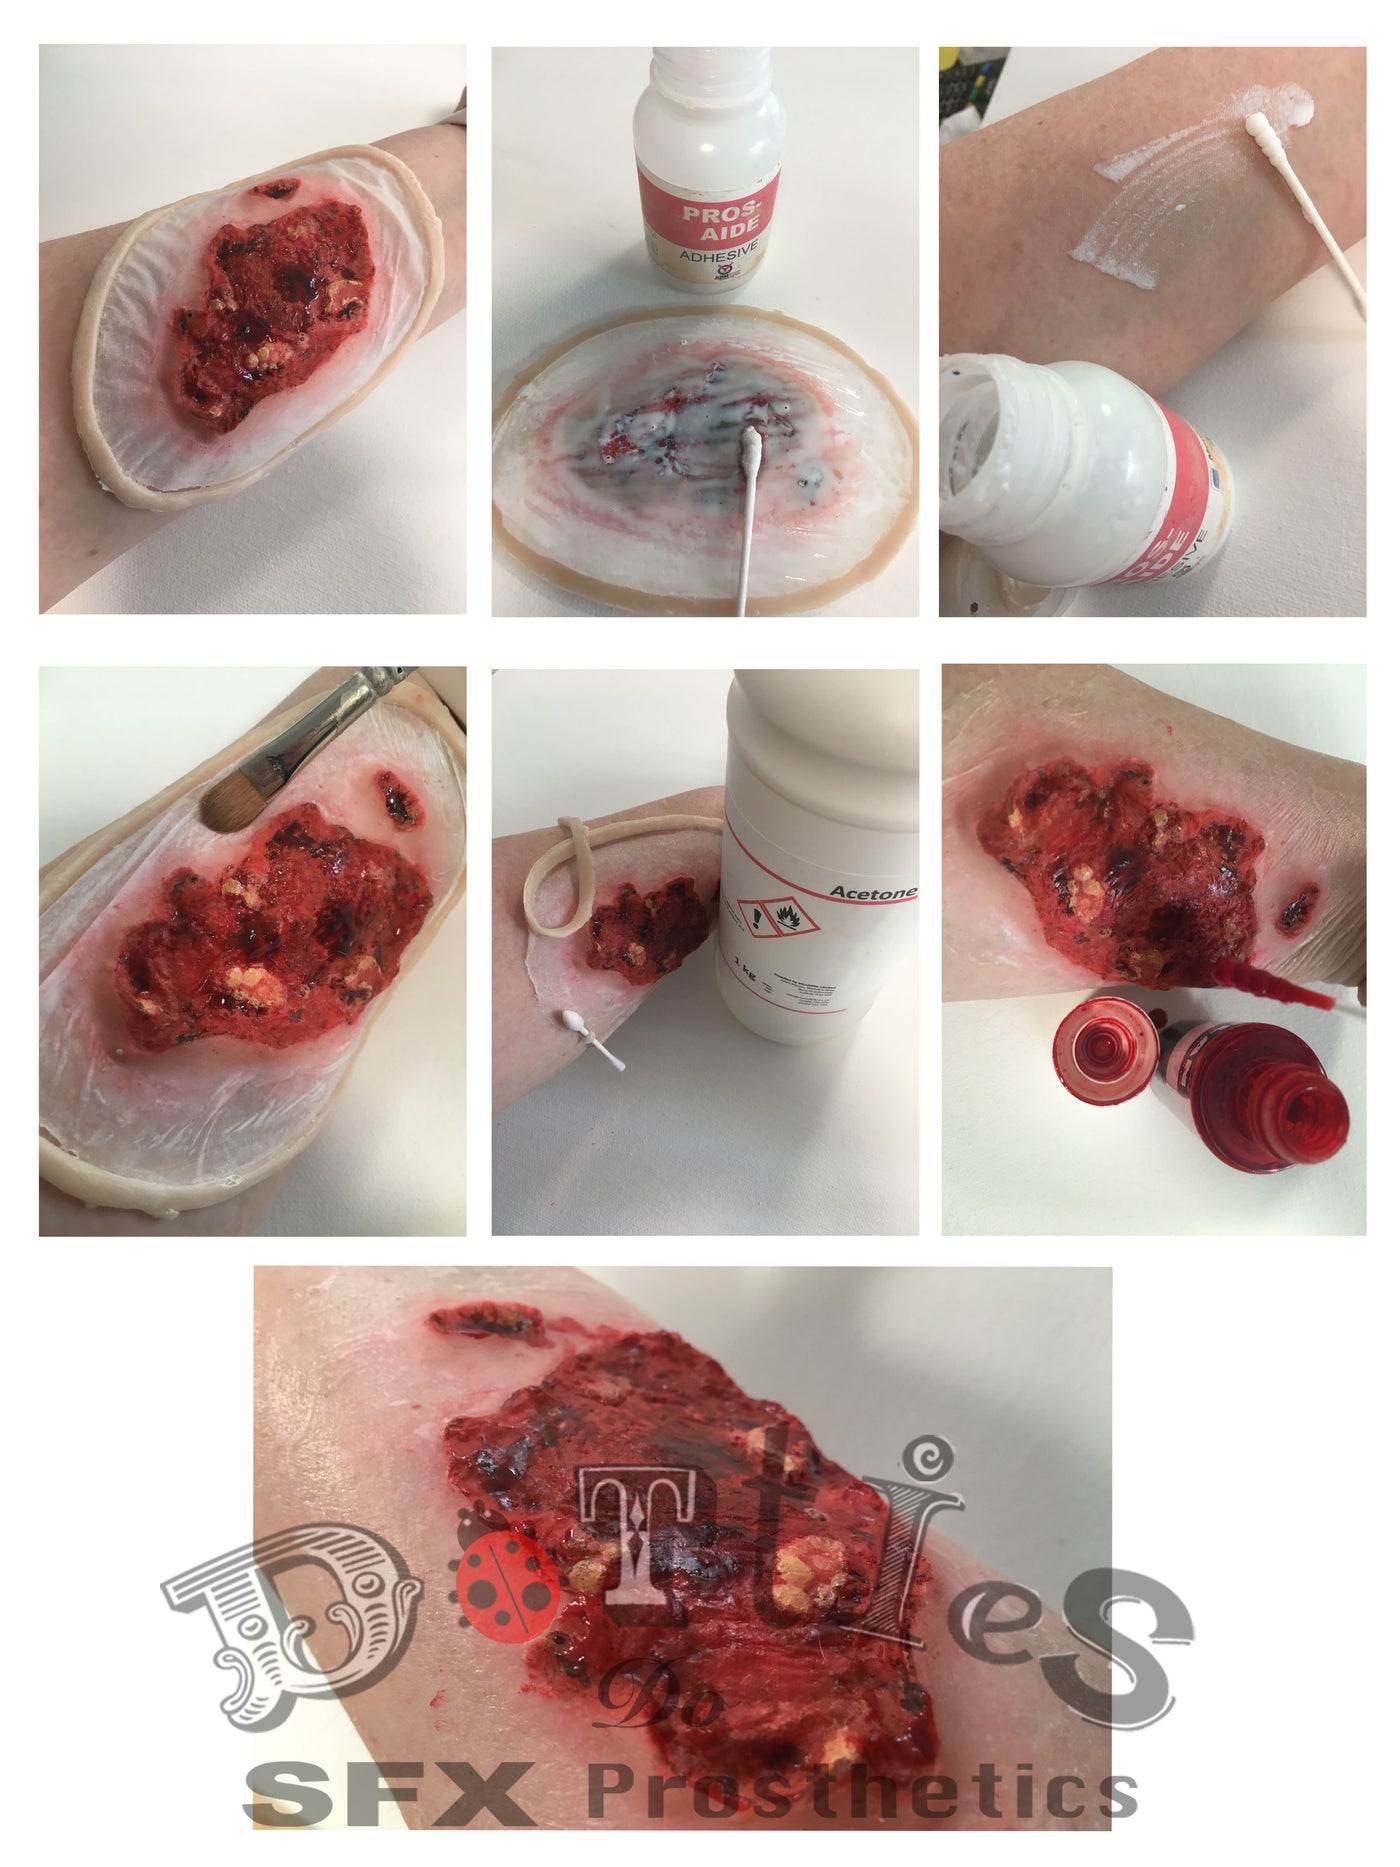 Large Unpainted Silicone Prosthetic Open Zip wound